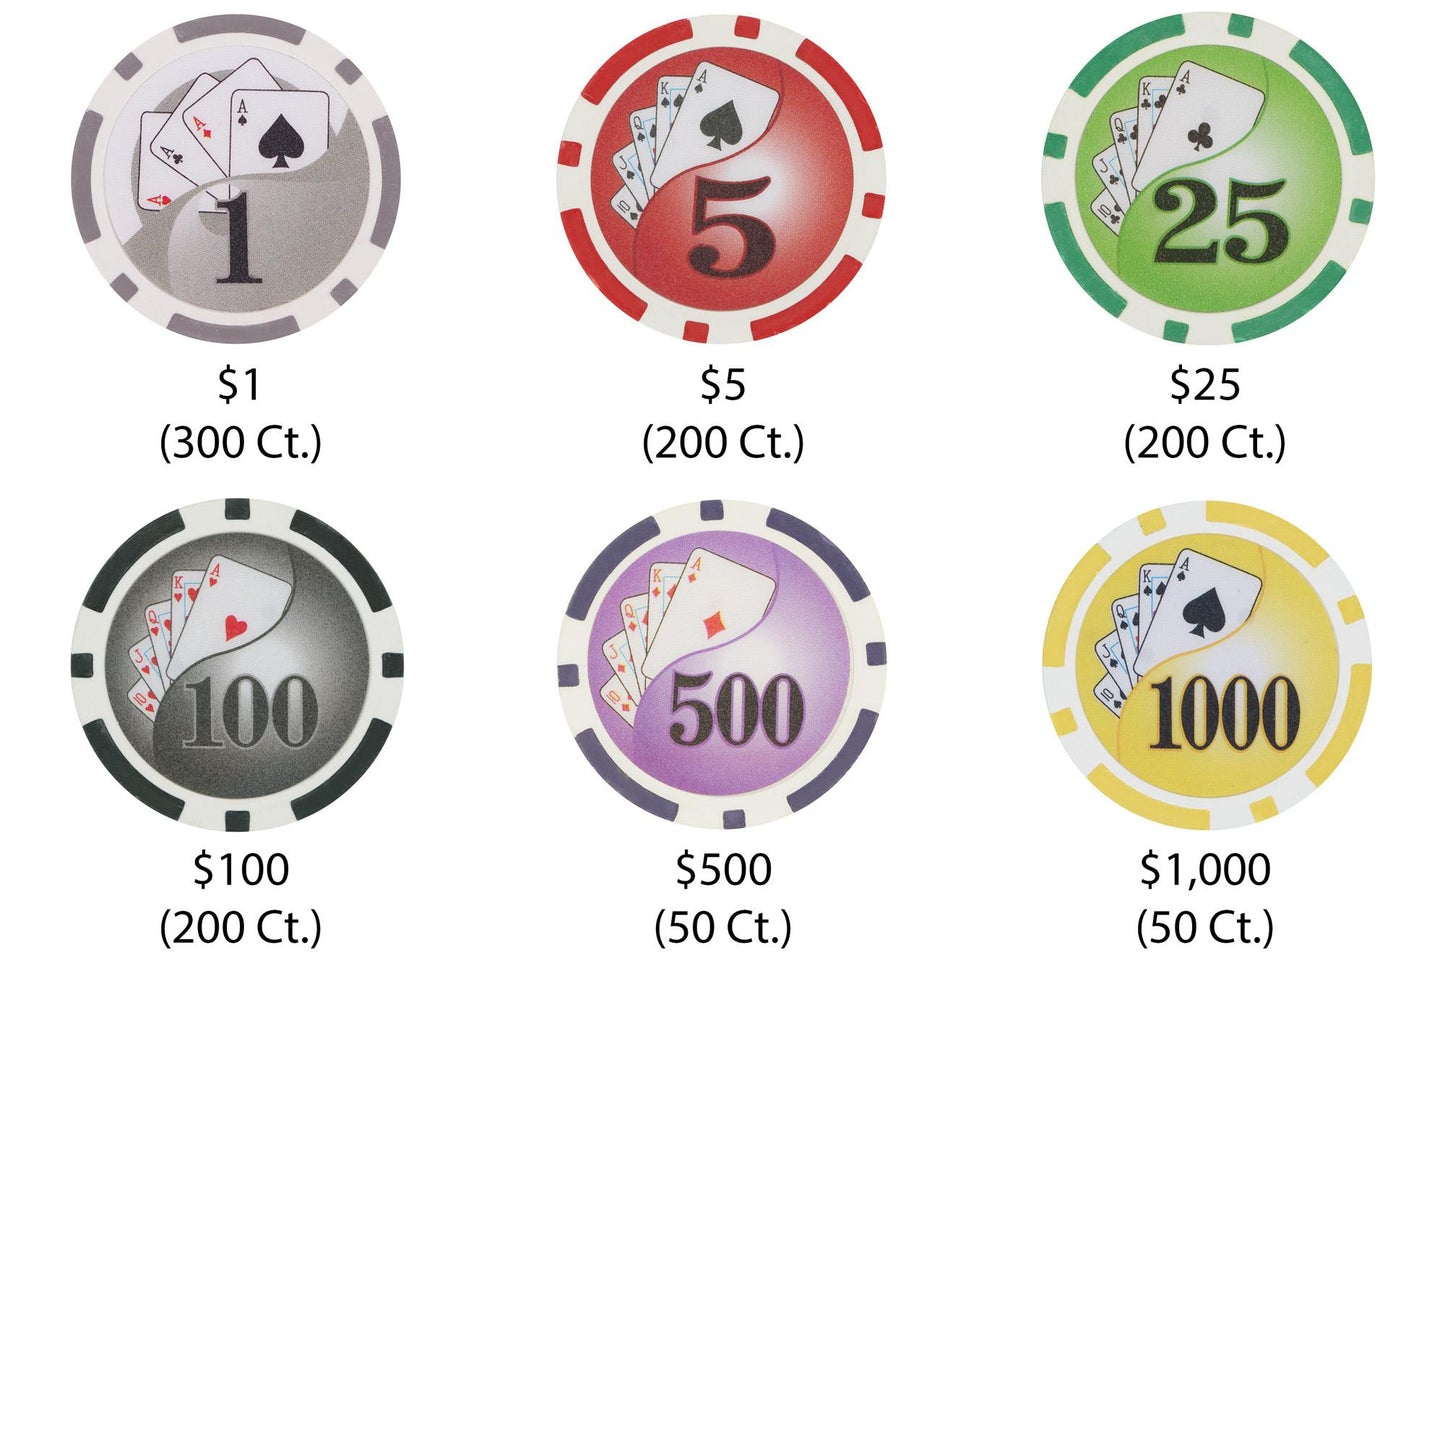 1000 Yin Yang Poker Chips with Acrylic Carrier